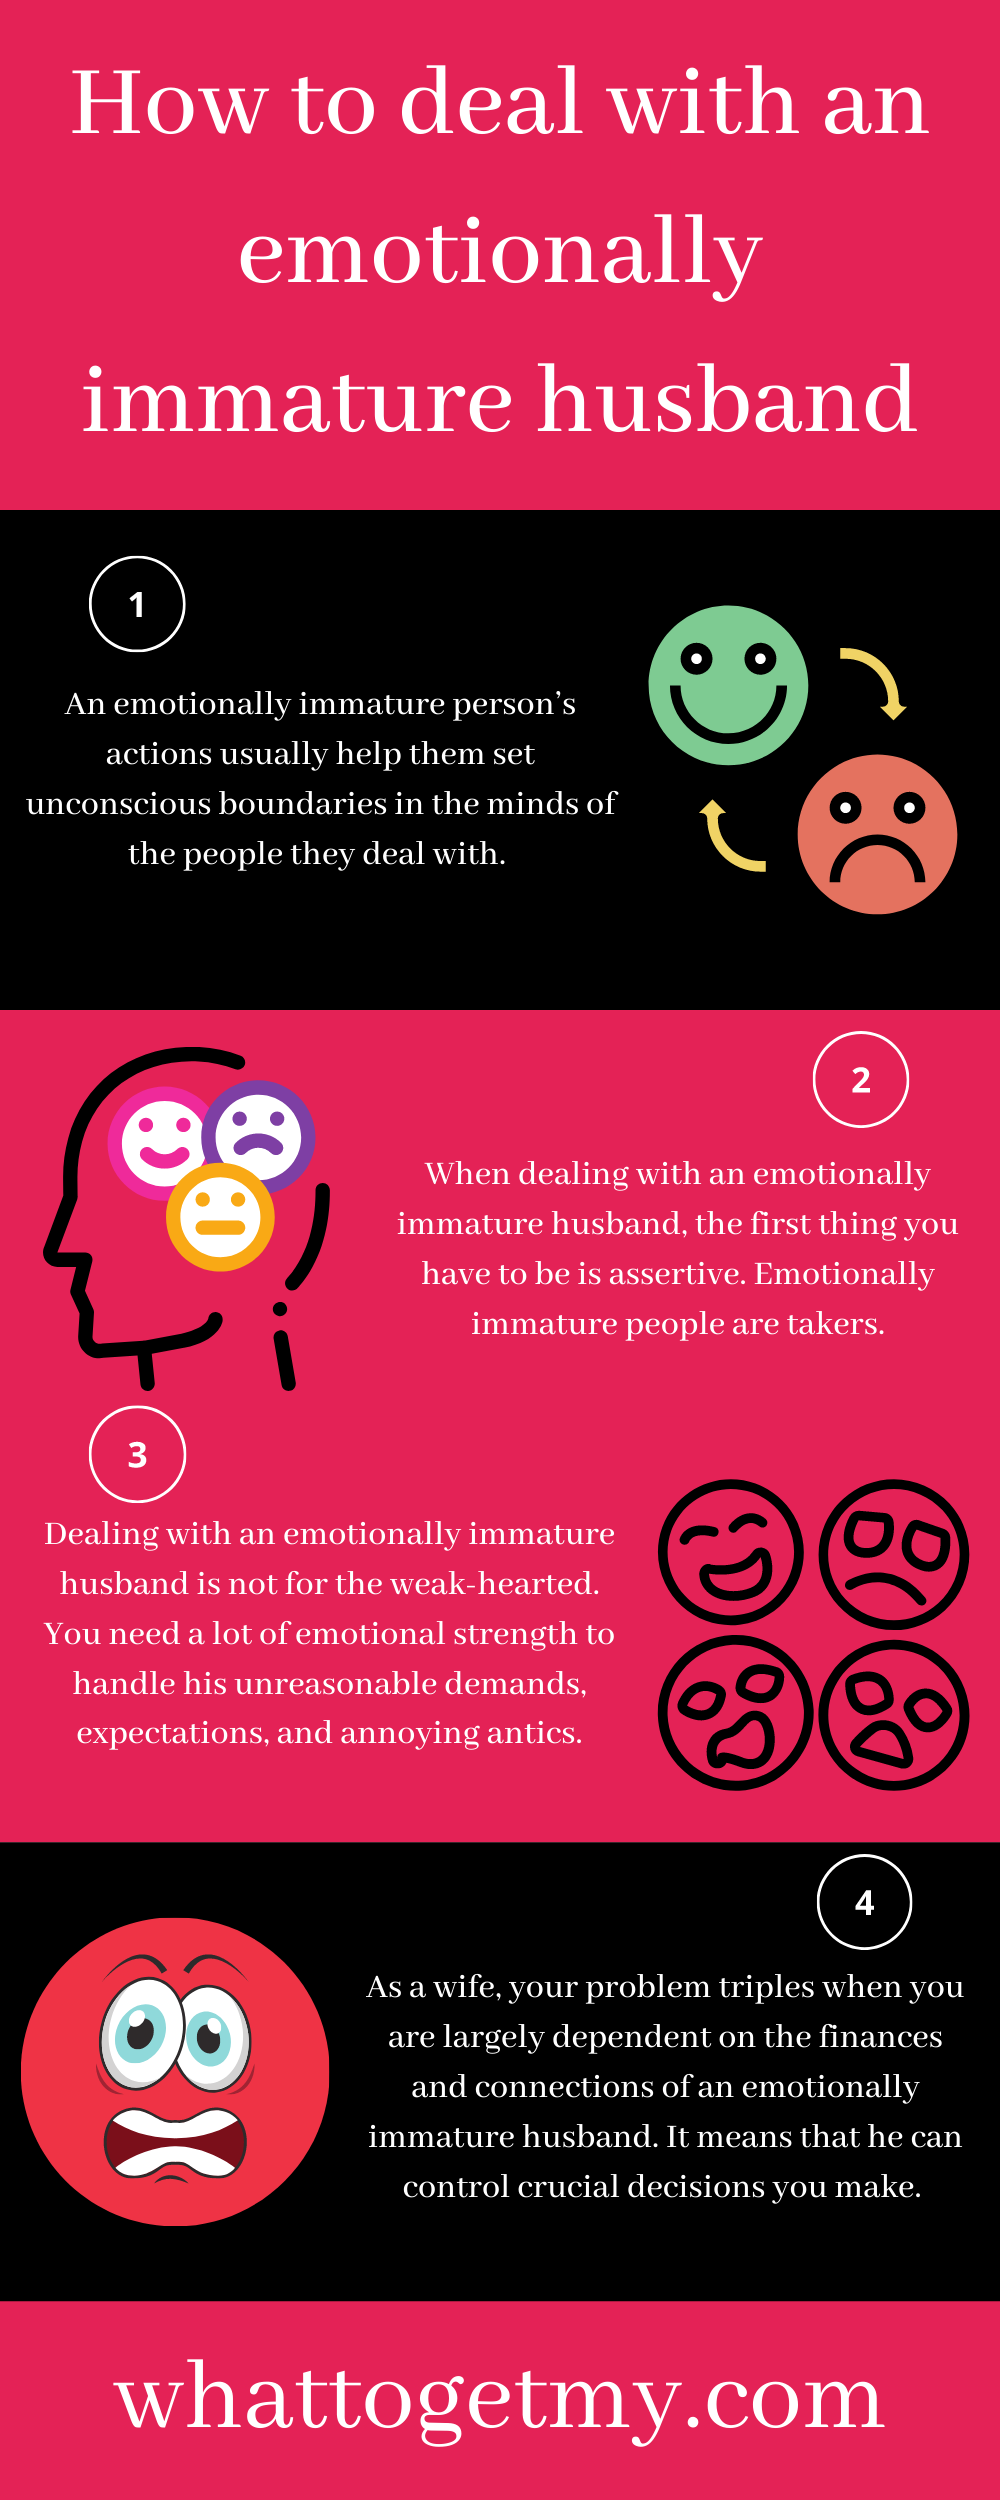 How to deal with an emotionally immature husband?